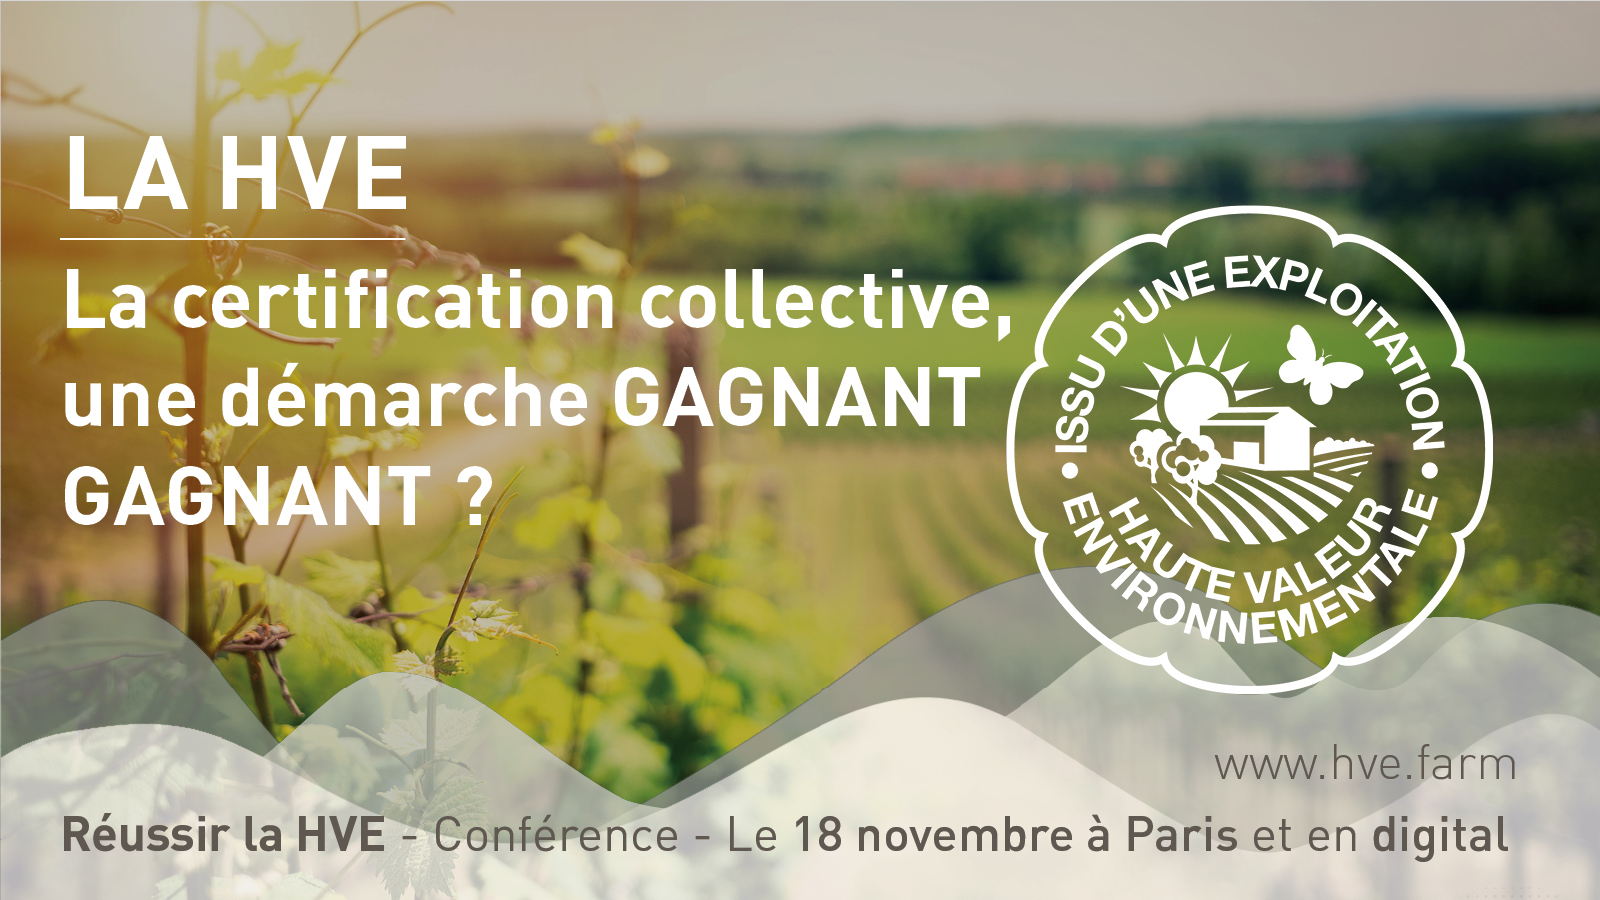 You are currently viewing La certification collective HVE, une démarche gagnant gagnant ?